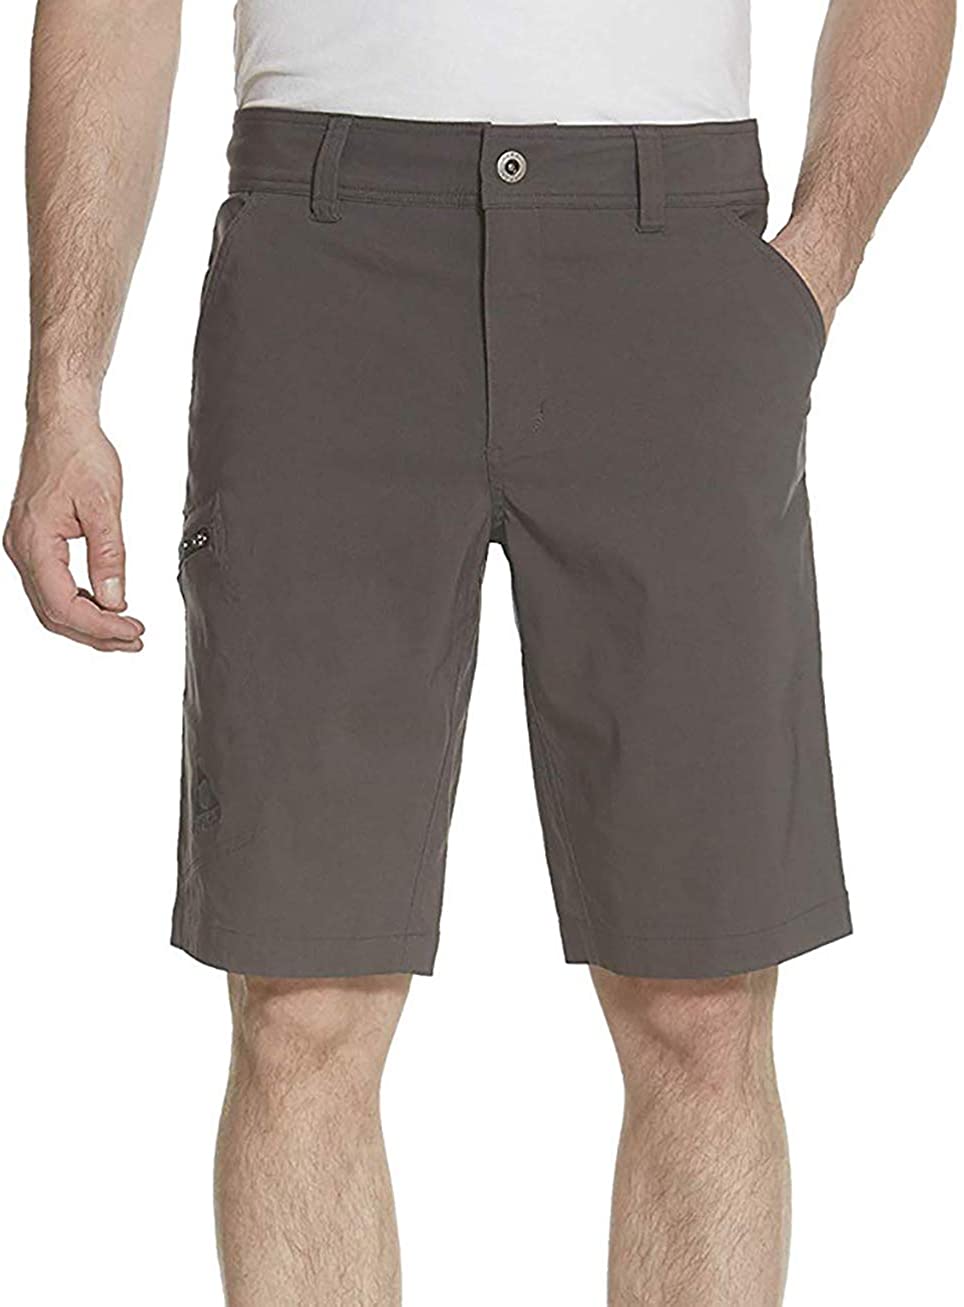 Gerry Mens Stretch Cargo 5 Pocket Shorts Venture Flat Front Woven Hiking  Shorts